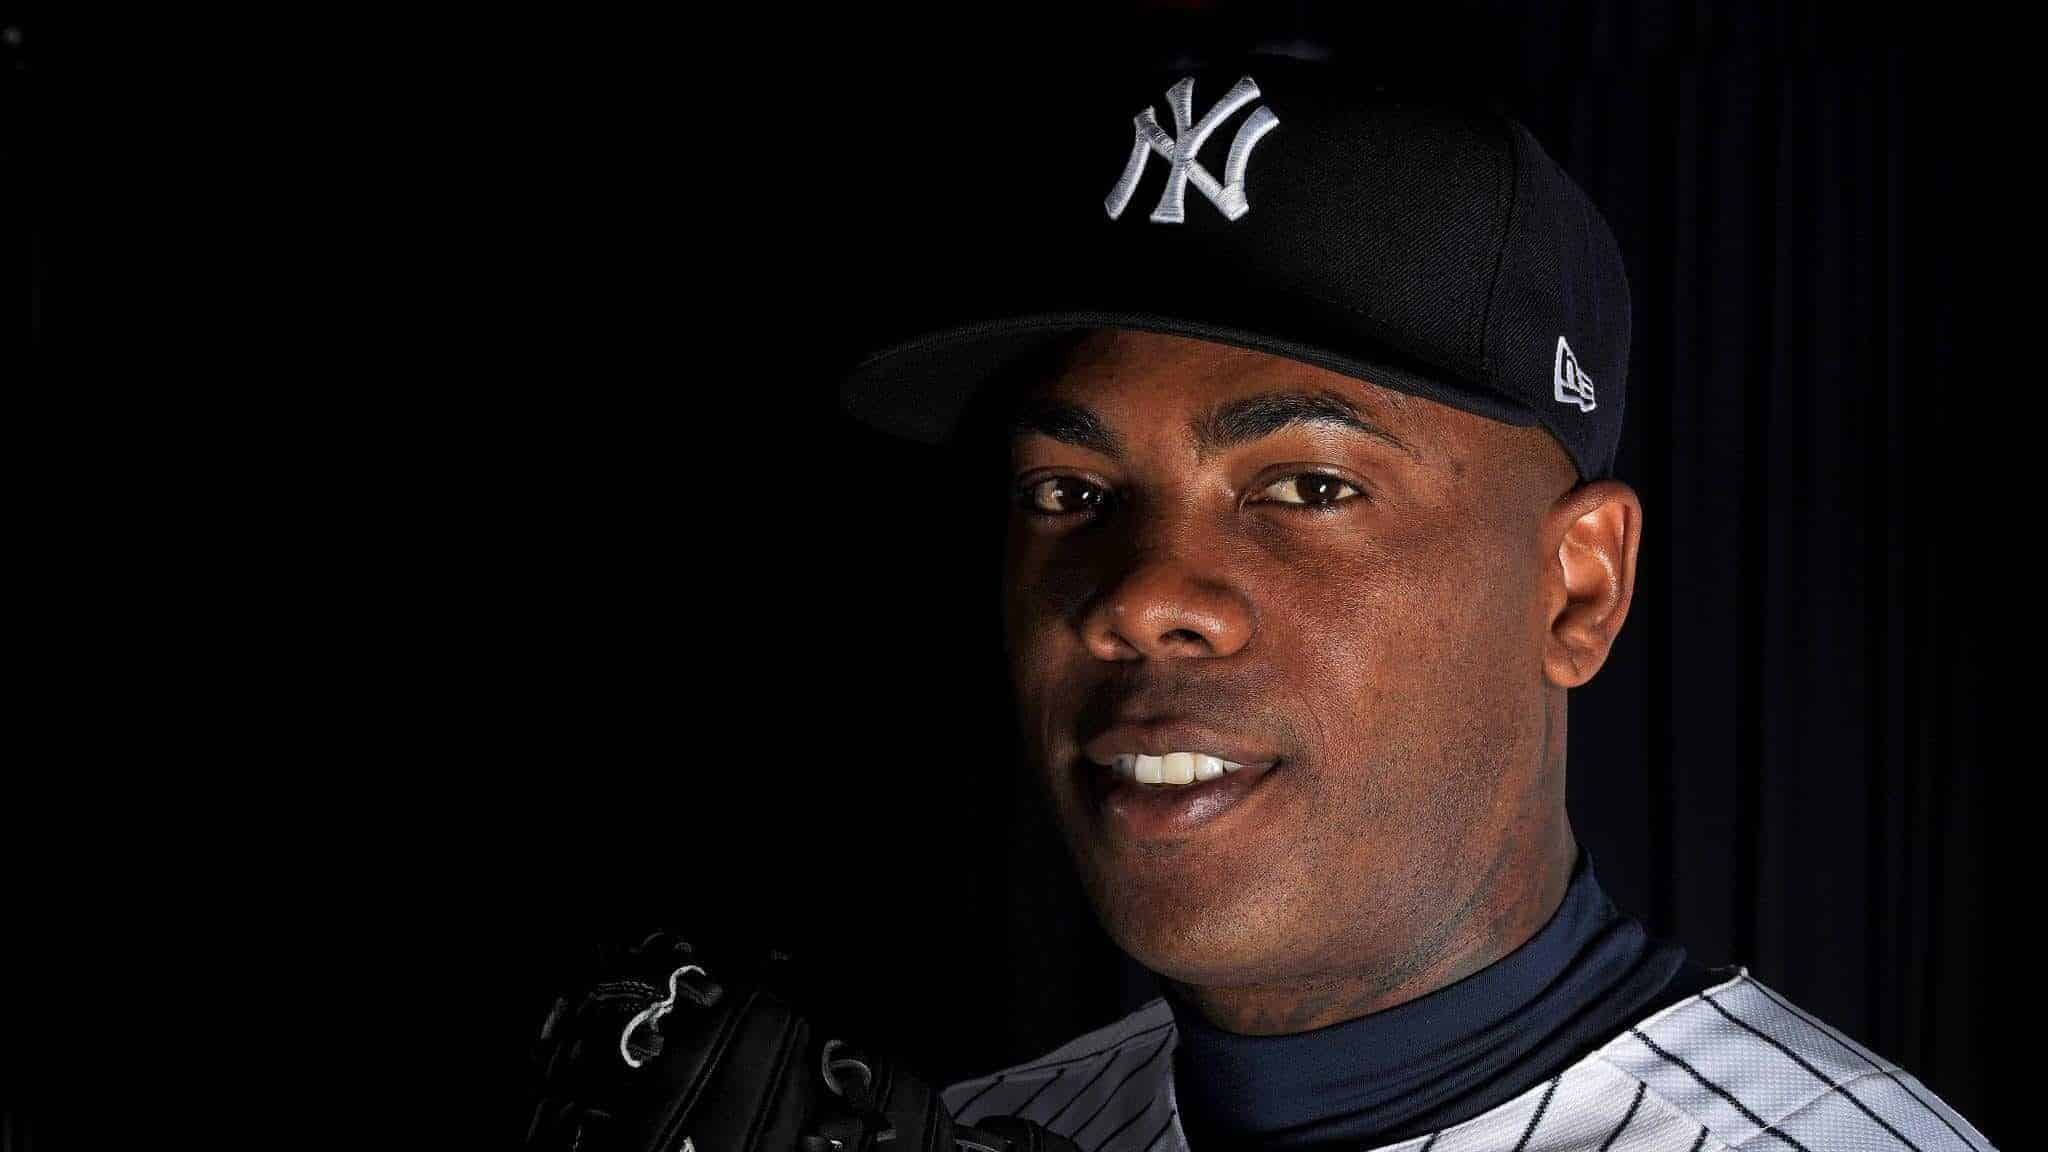 TAMPA, FLORIDA - FEBRUARY 20: Aroldis Chapman #54 of the New York Yankees poses for a portrait during photo day on February 20, 2020 in Tampa, Florida.